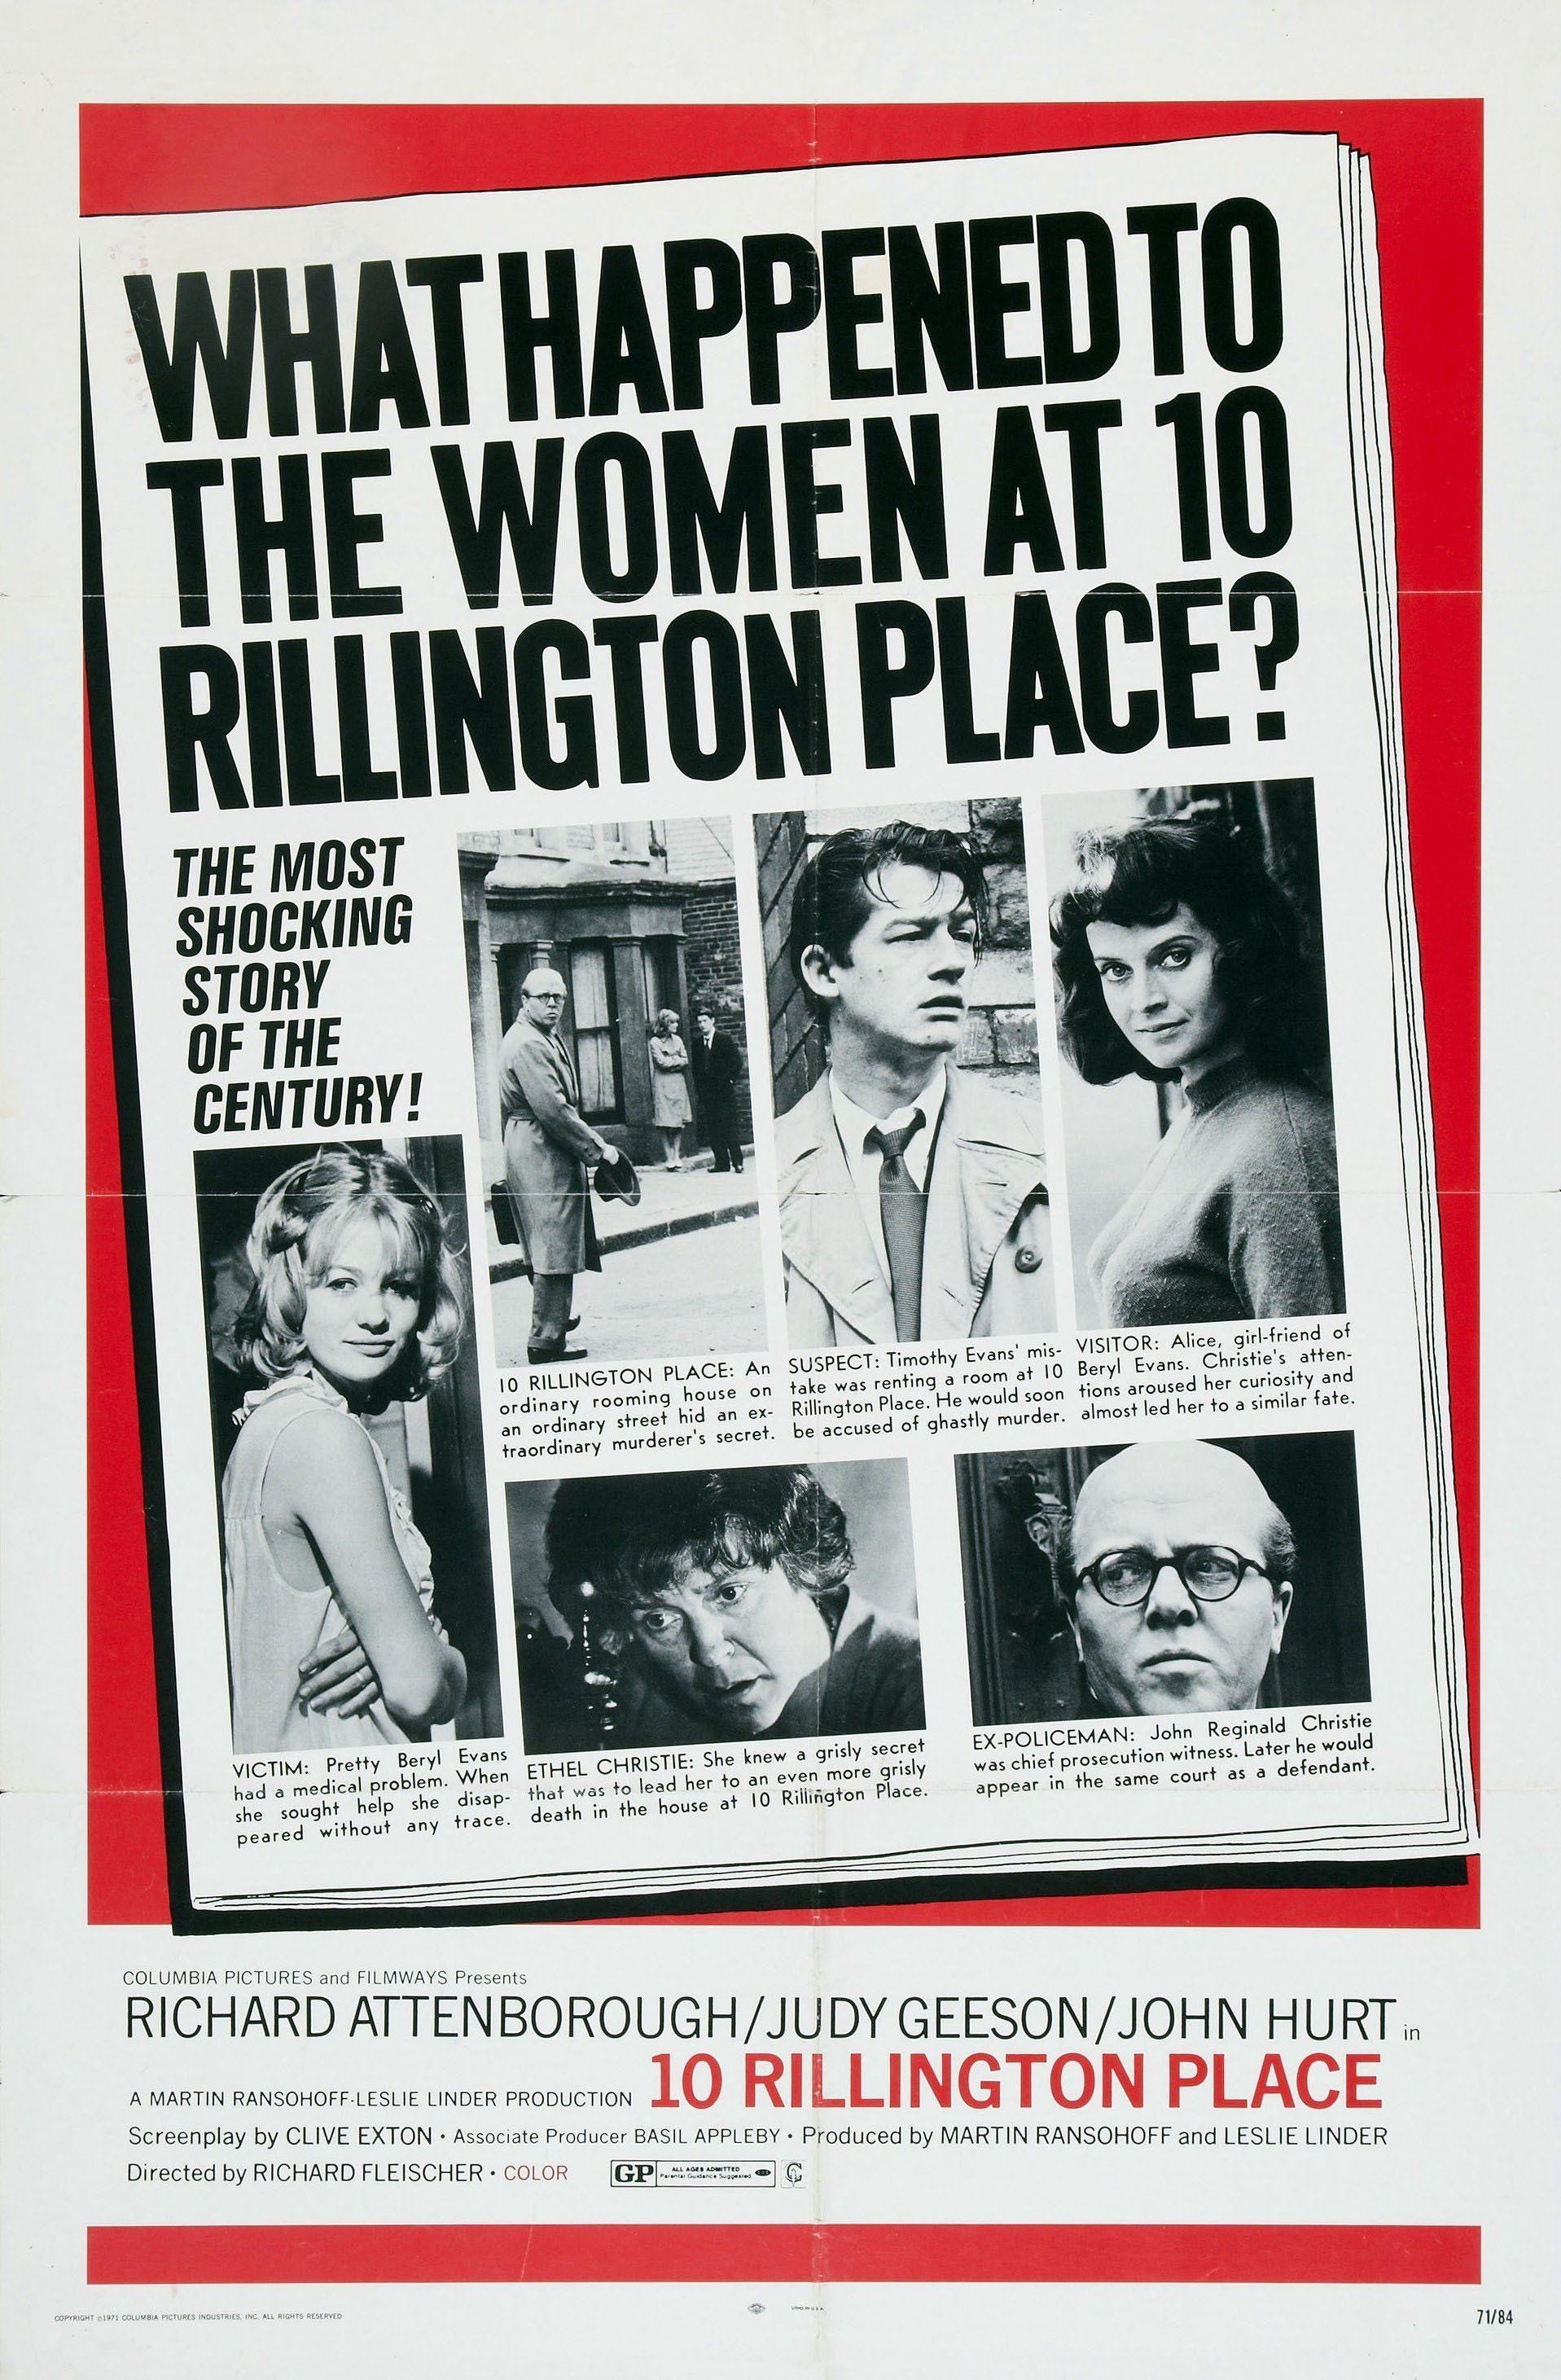 Poster image for the film &quot;10 Rillington Place&quot; with photos of the cast pictured in black and white on a newspaper cover page with the words &quot;What Happened to the Women at 10 Rillington Place&quot; as the headline